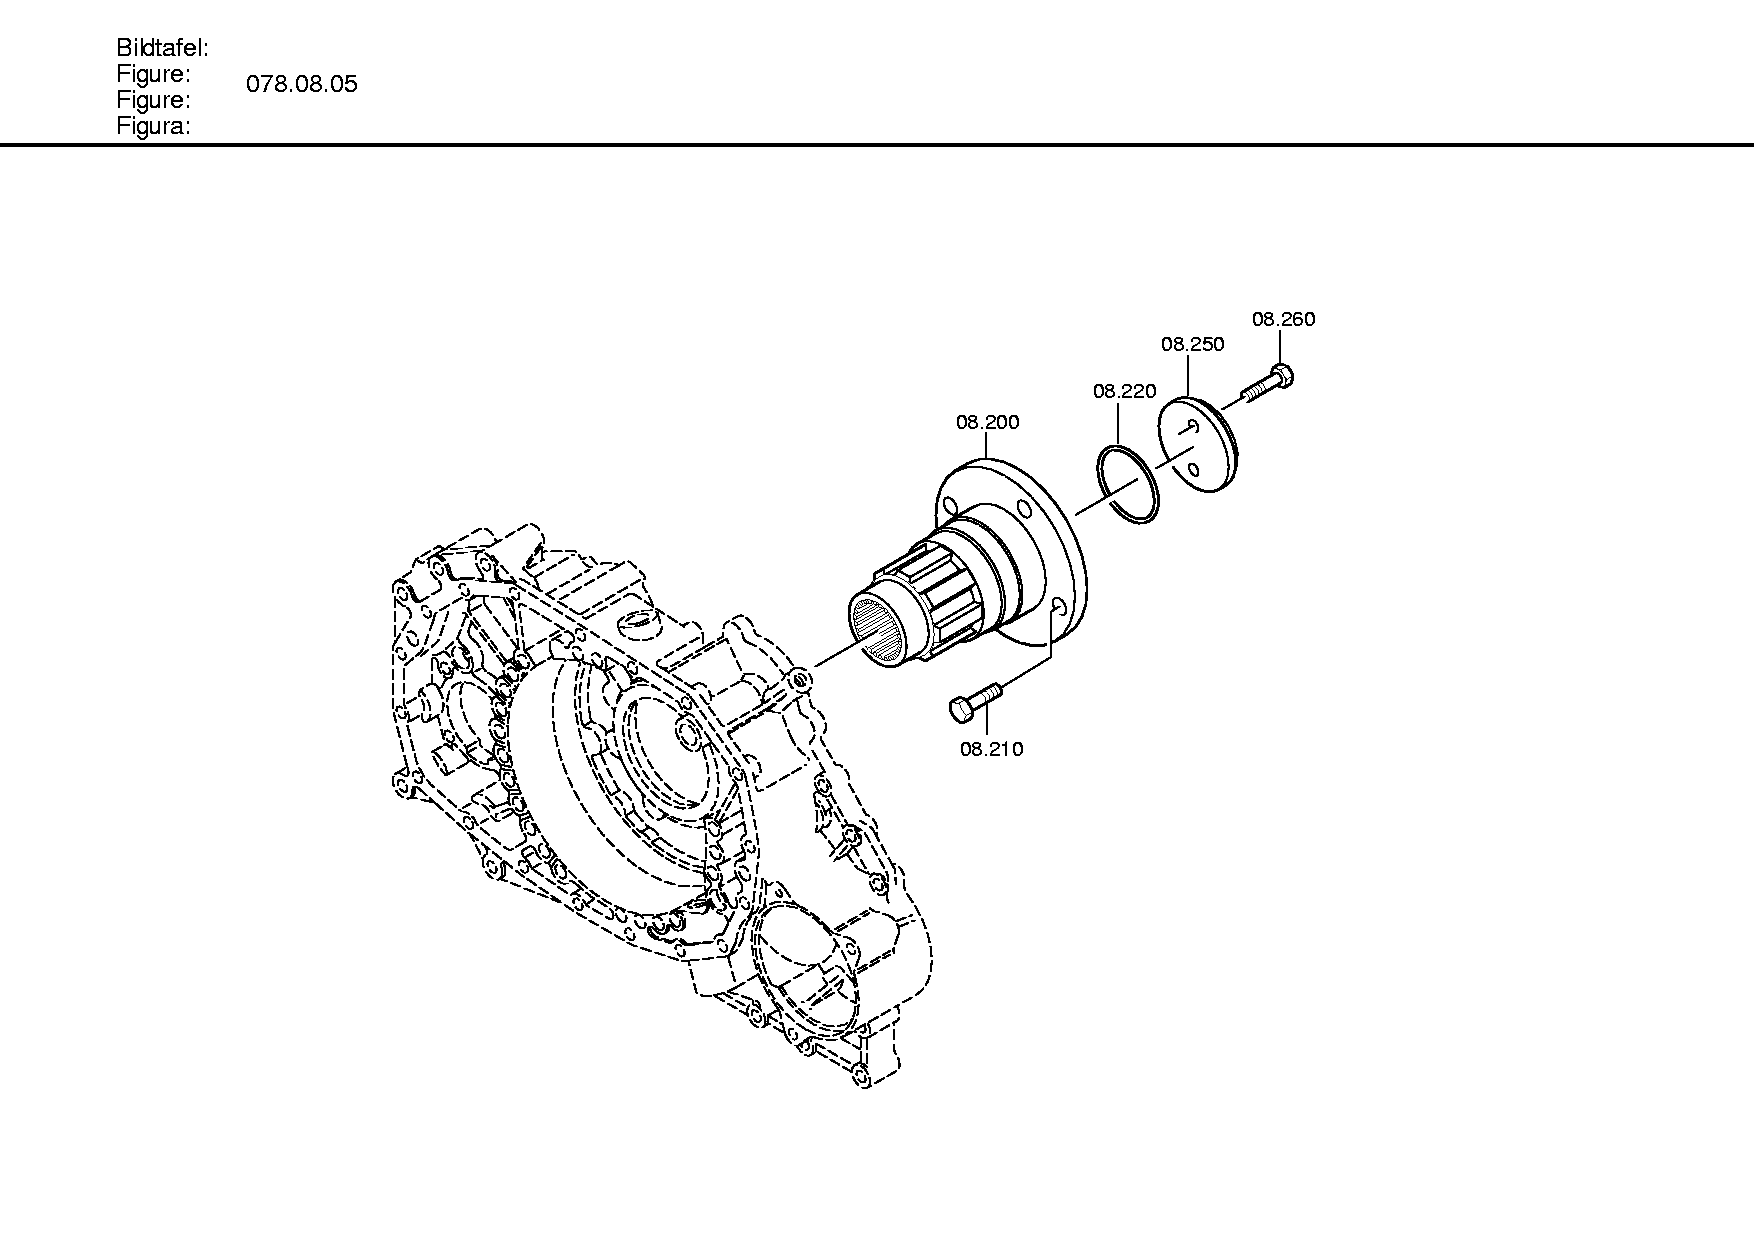 drawing for VOITH-GETRIEBE KG 1900038006370 - HEXAGON SCREW (figure 4)